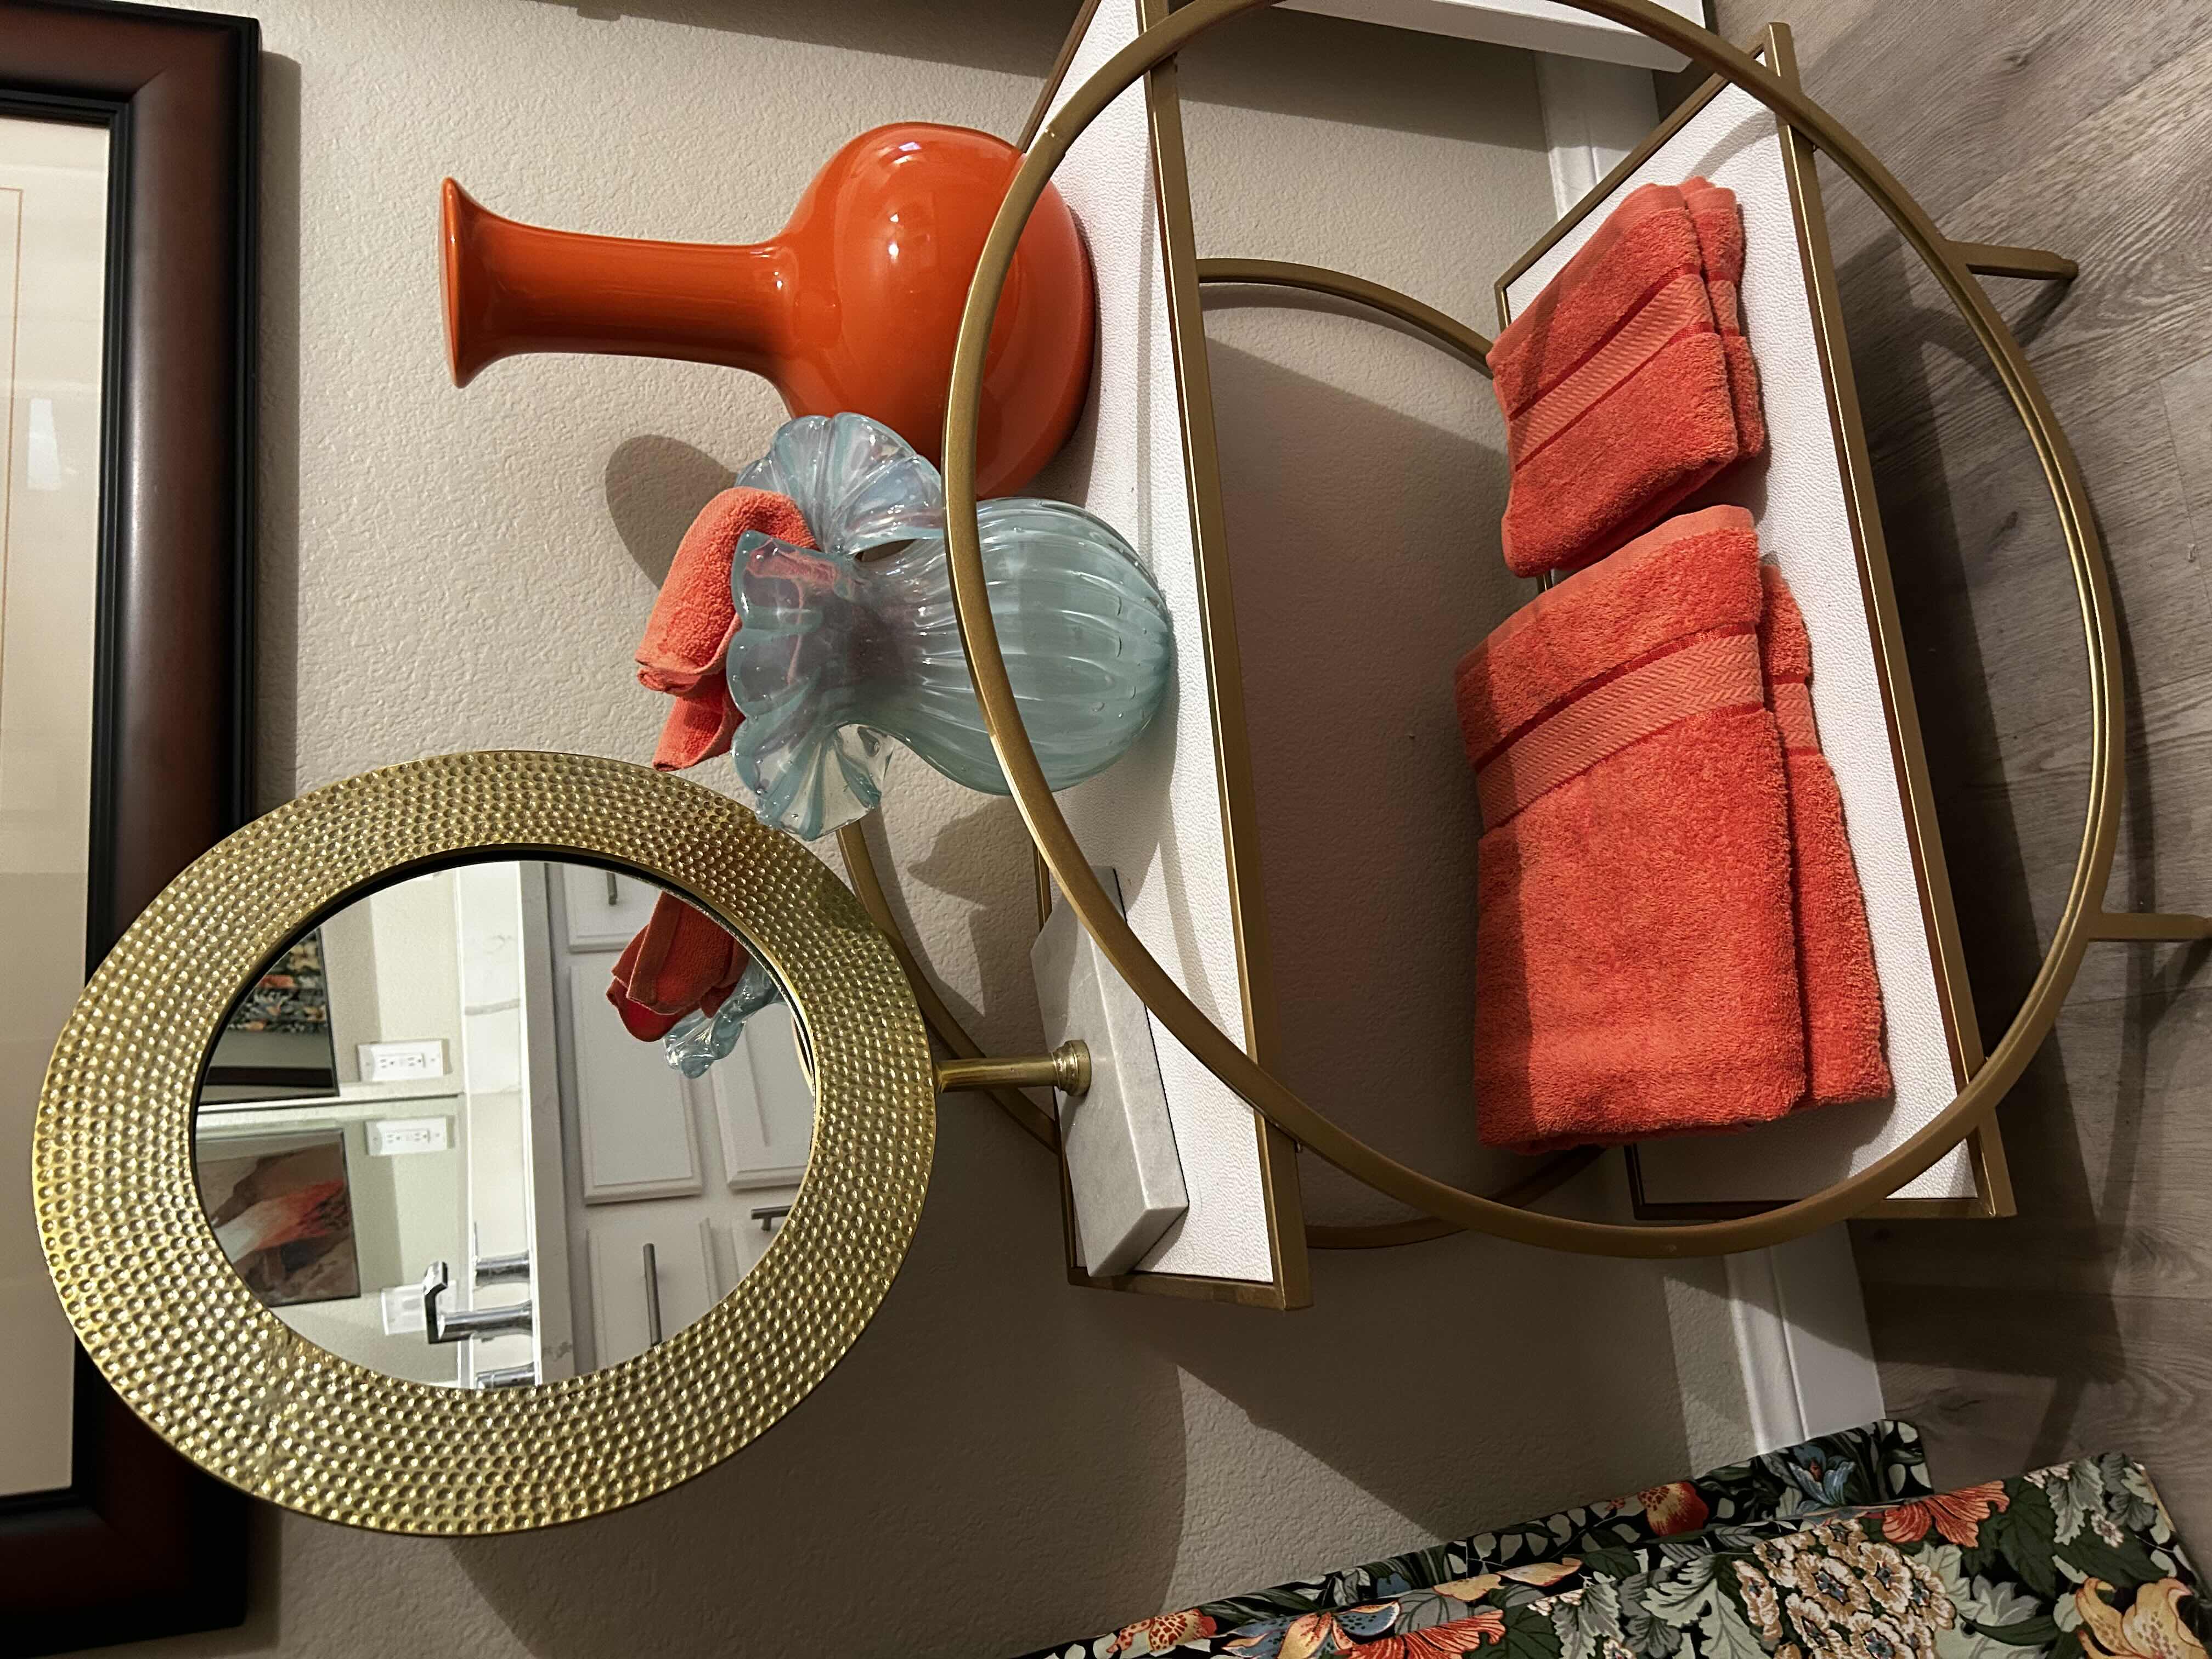 Photo 11 of BATHROOM ENSEMBLE INCLUDES- DRAPERY PANELS, 2 ARTWORK, ORANGE VASE AND GOLD HAMMERED MIRROR ON STAND, 2 BLACK AND WHITE TALL JARS WITH LIDS AND BLUE GLASS VASE (CART NOT INCLUDED) LARGEST FRAMED ARTWORK 3’ x 46”